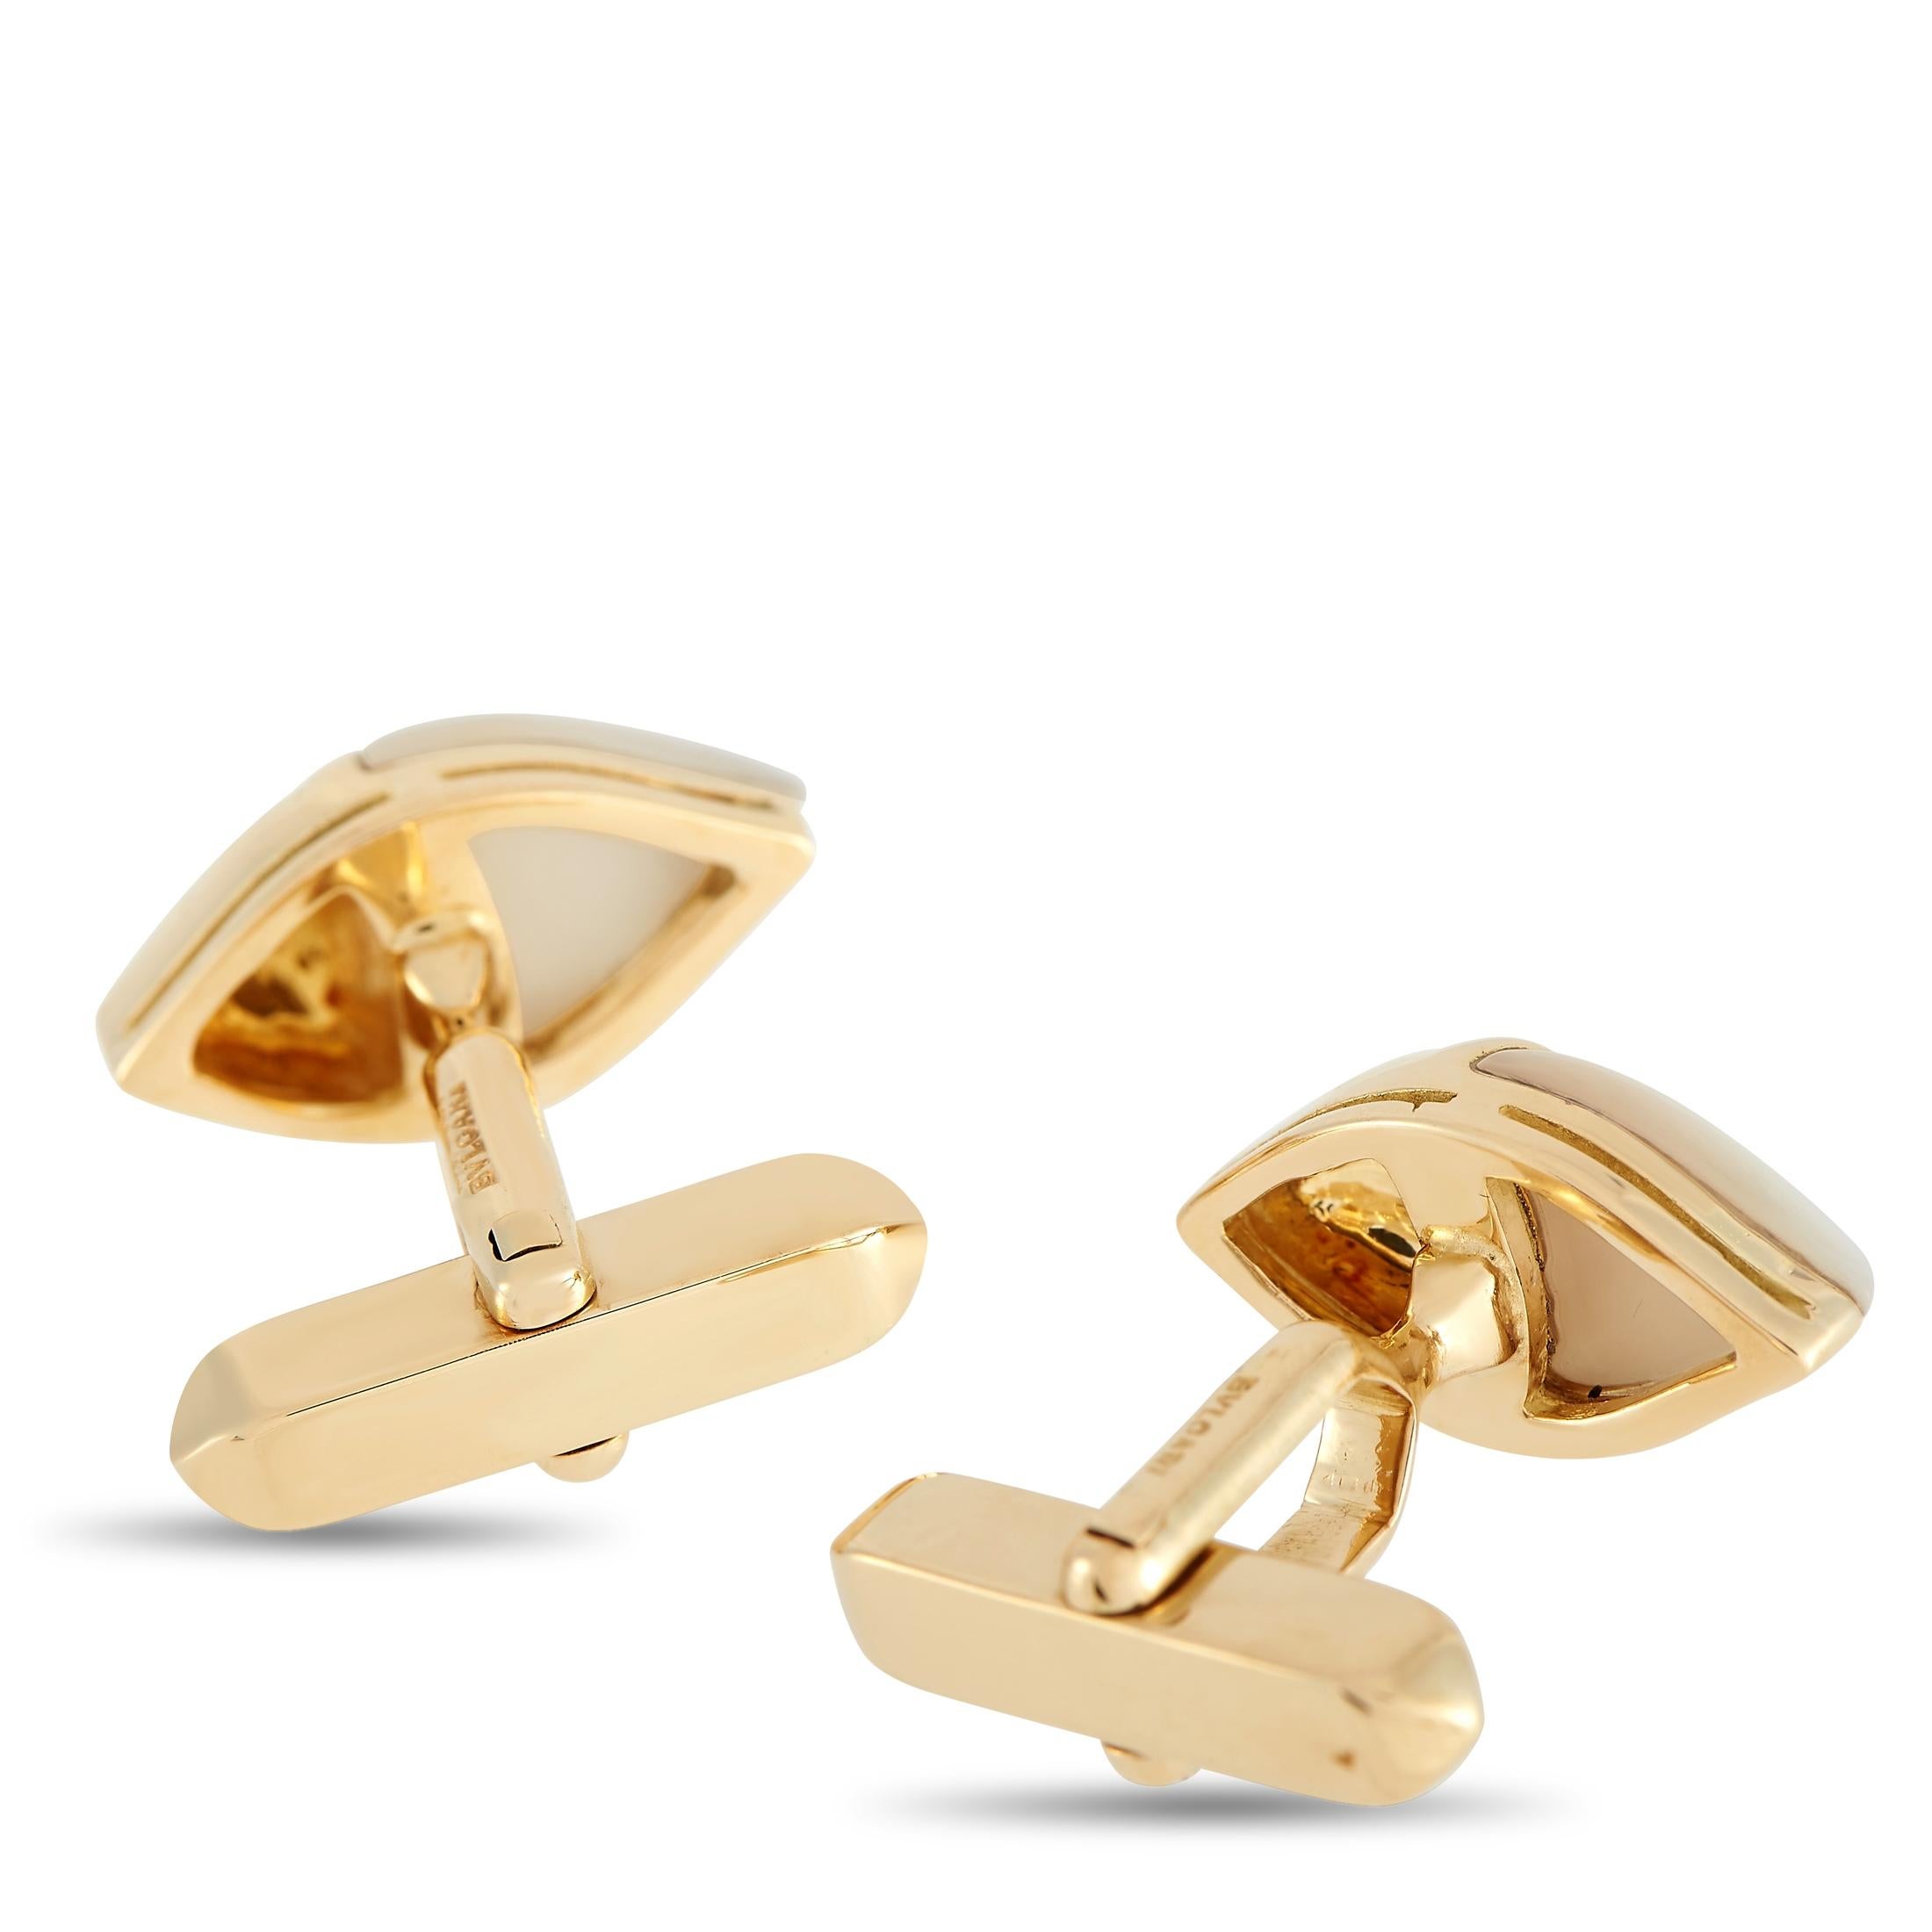 These classic, understated Bvlgari Naturalia cufflinks draw inspiration from the natural world. Each one of these elegant cufflinks measures 0.75” long and 0.38” wide. A dynamic pairing of 18K Yellow Gold and Mother of Pearl give them a sleek